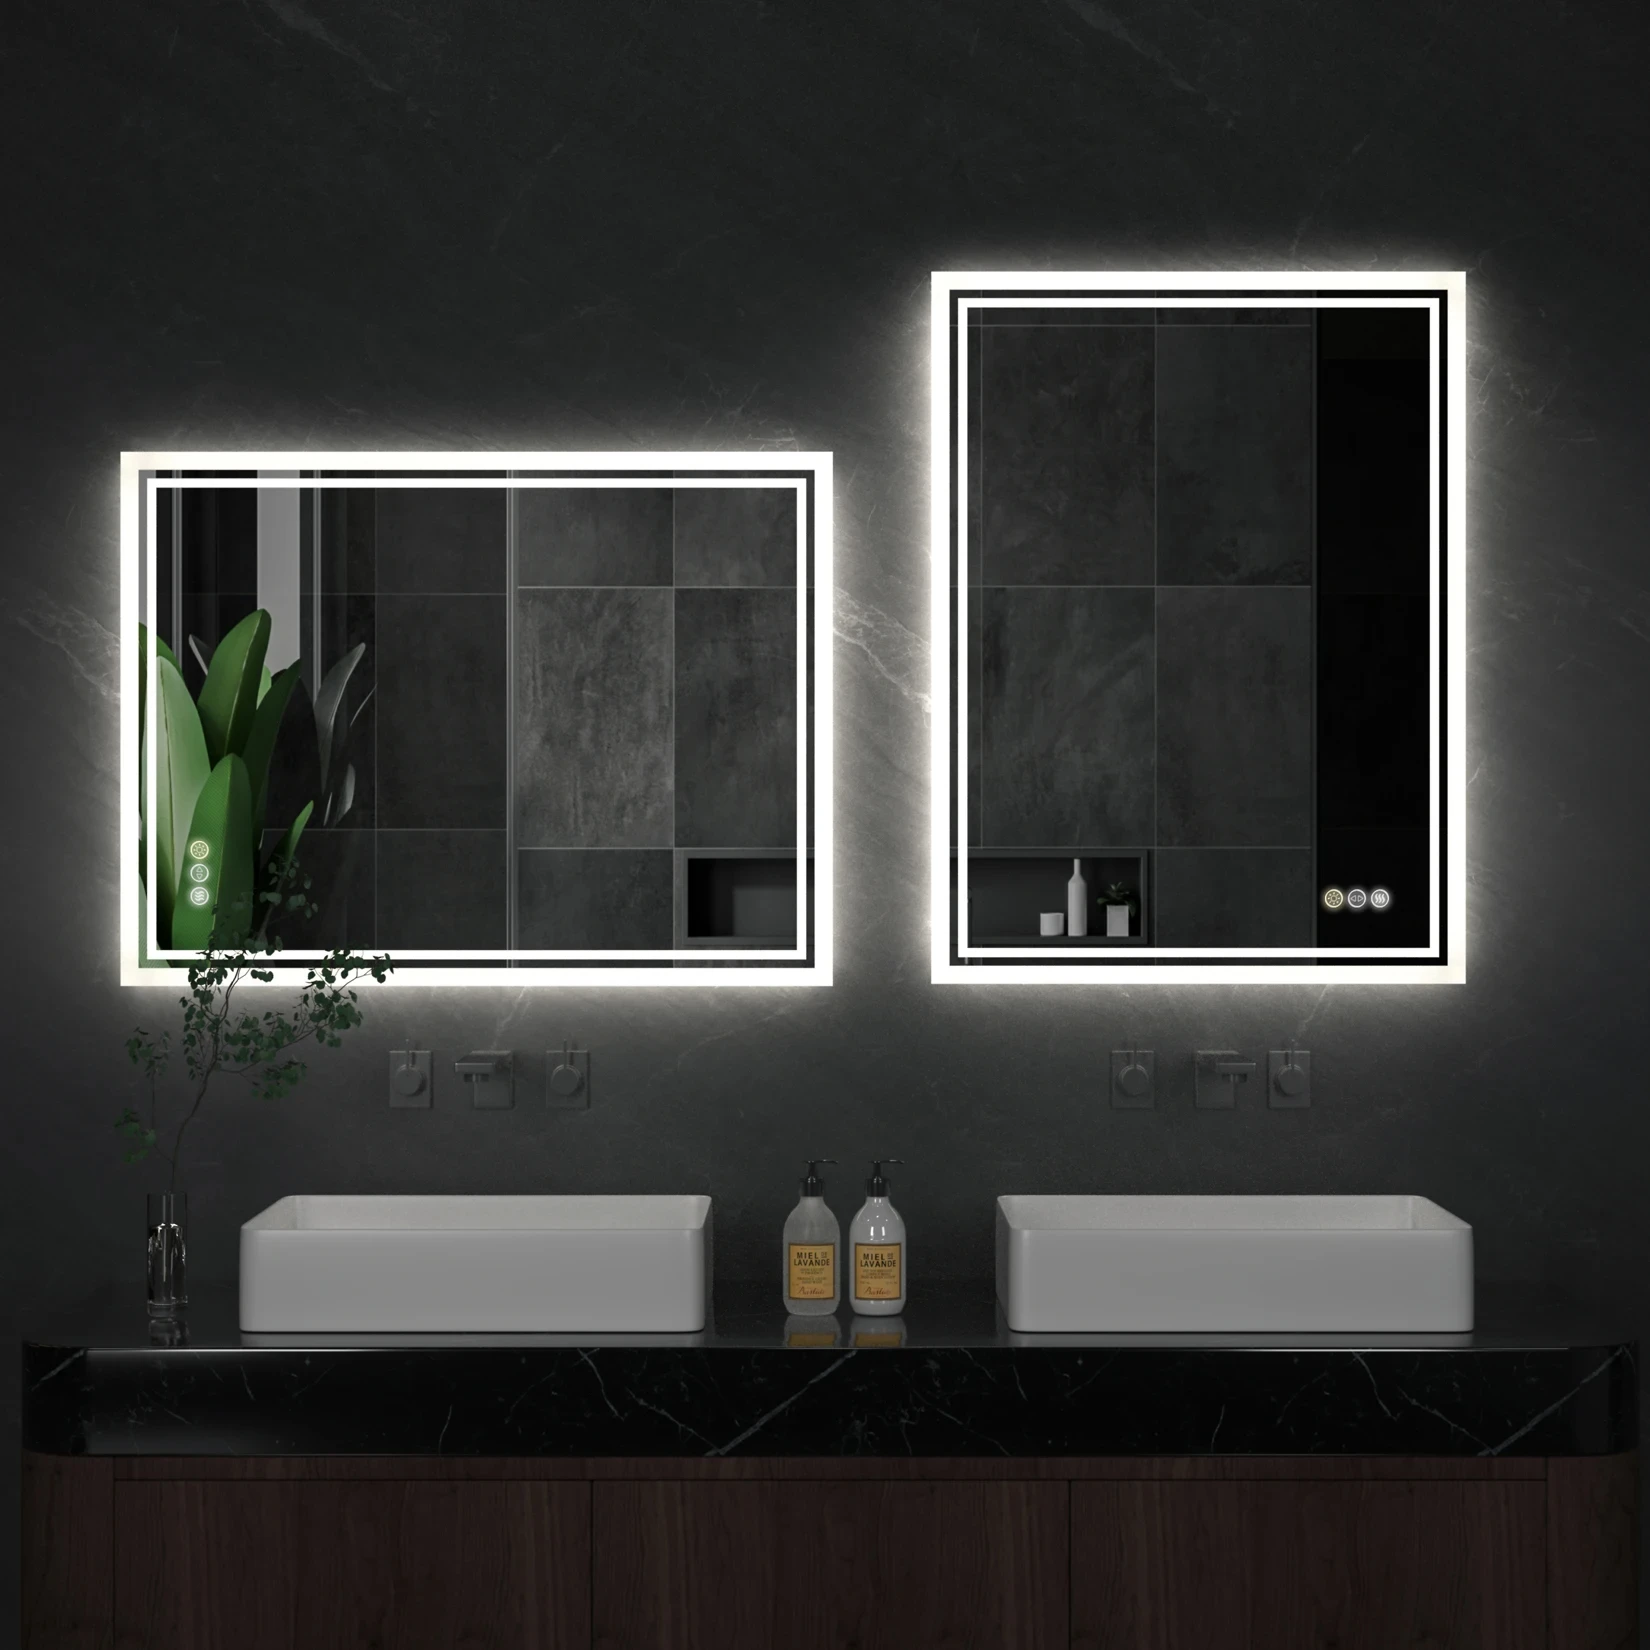 

LED Backlit Mirror Bathroom Vanity with Lights,Anti-Fog,Dimmable,CRI90+,Touch Button,Water Proof,Horizontal/Vertical